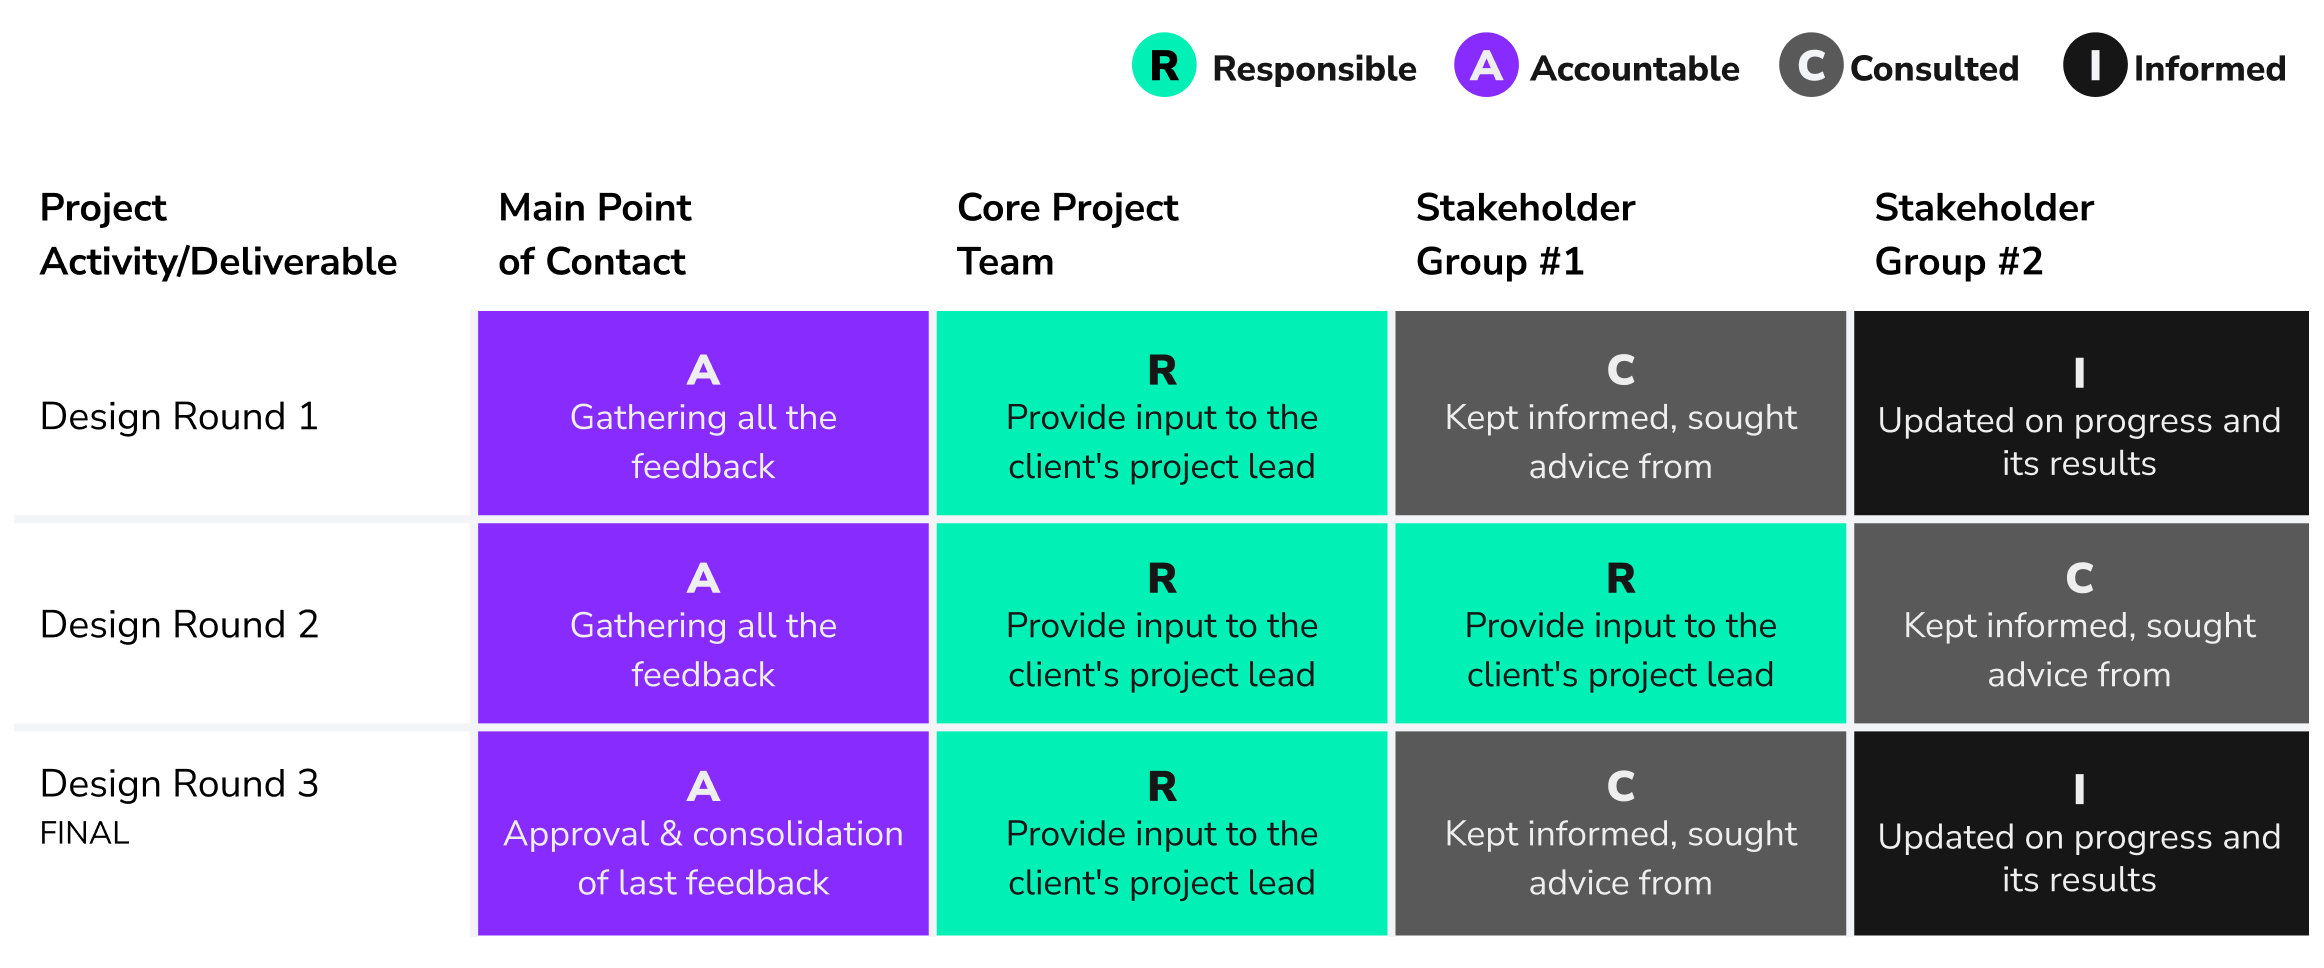 A RACI model showing the roles of the main point of contact, core project team, and other stakeholders. With each deliverable, the members in the RACI model are assigned a task.